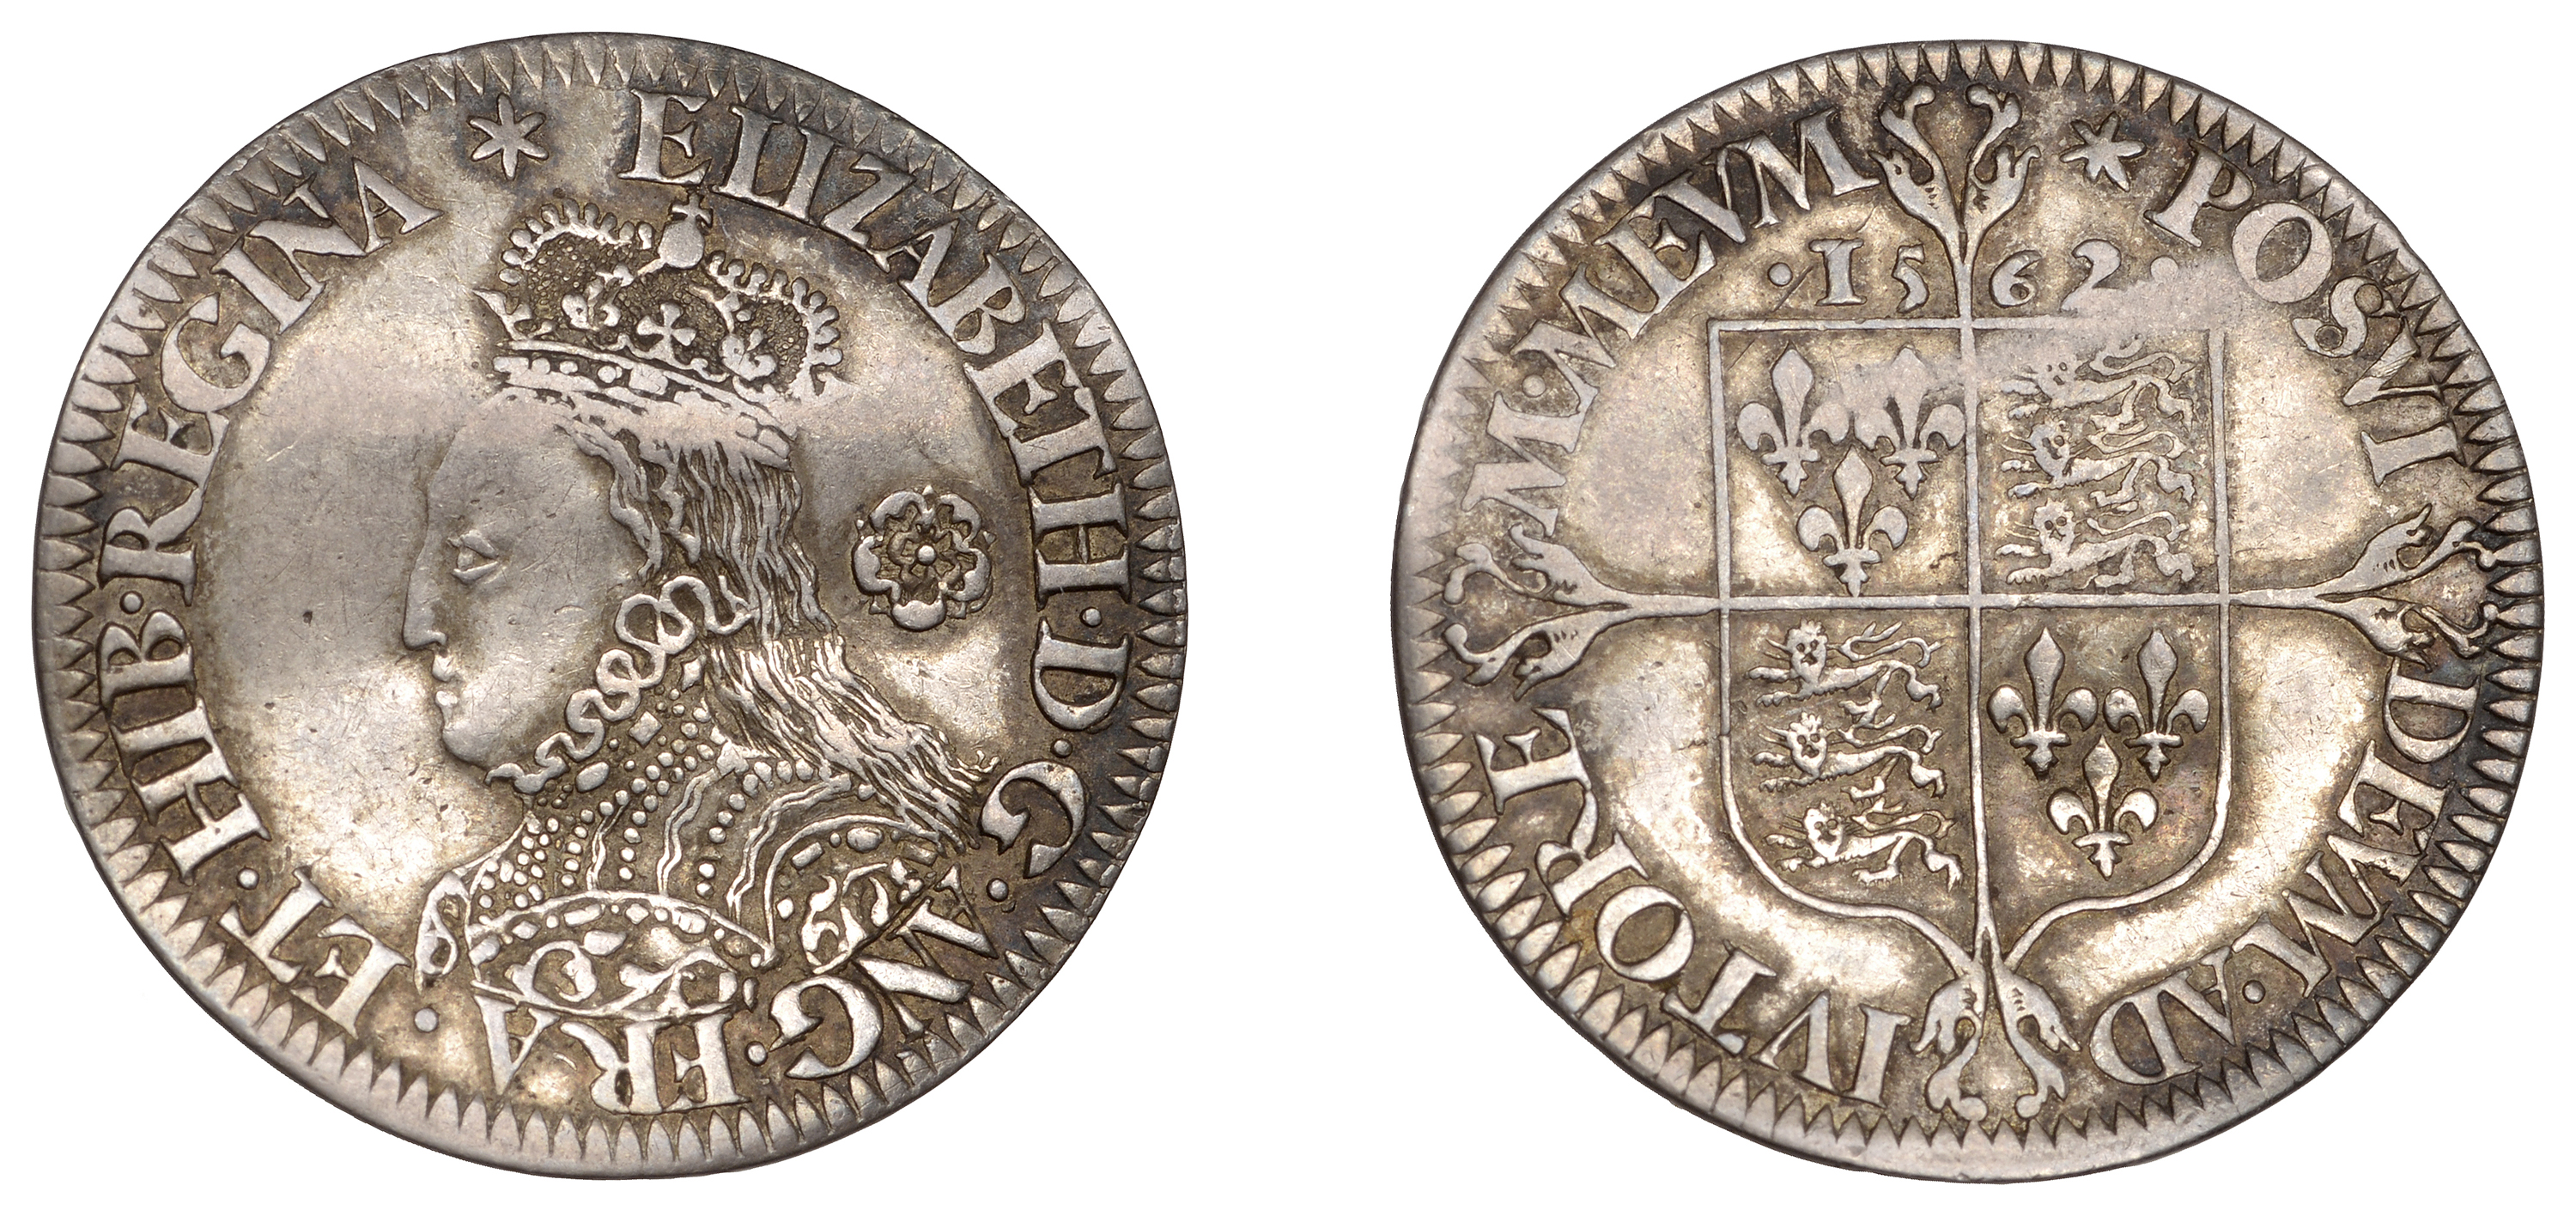 Elizabeth I (1558-1603), Milled coinage, Sixpence, 1562, mm. star, bust D, 2.94g/6h (Borden...